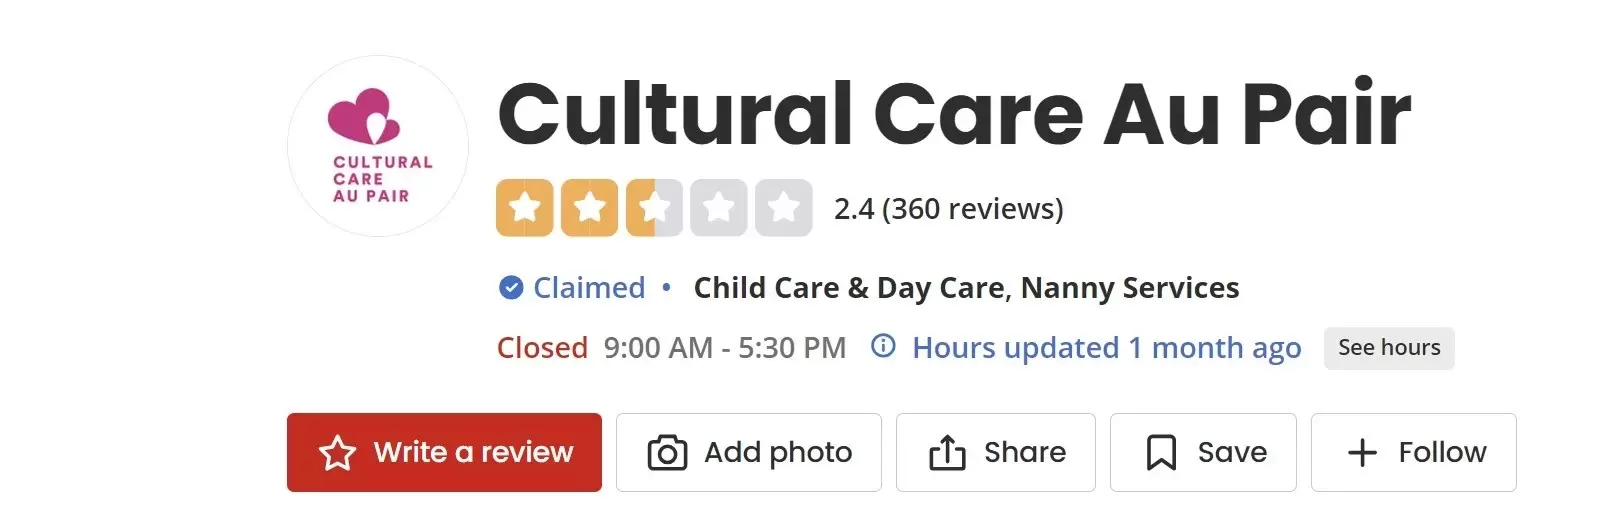 Cultural Care Au Pair on Yelp